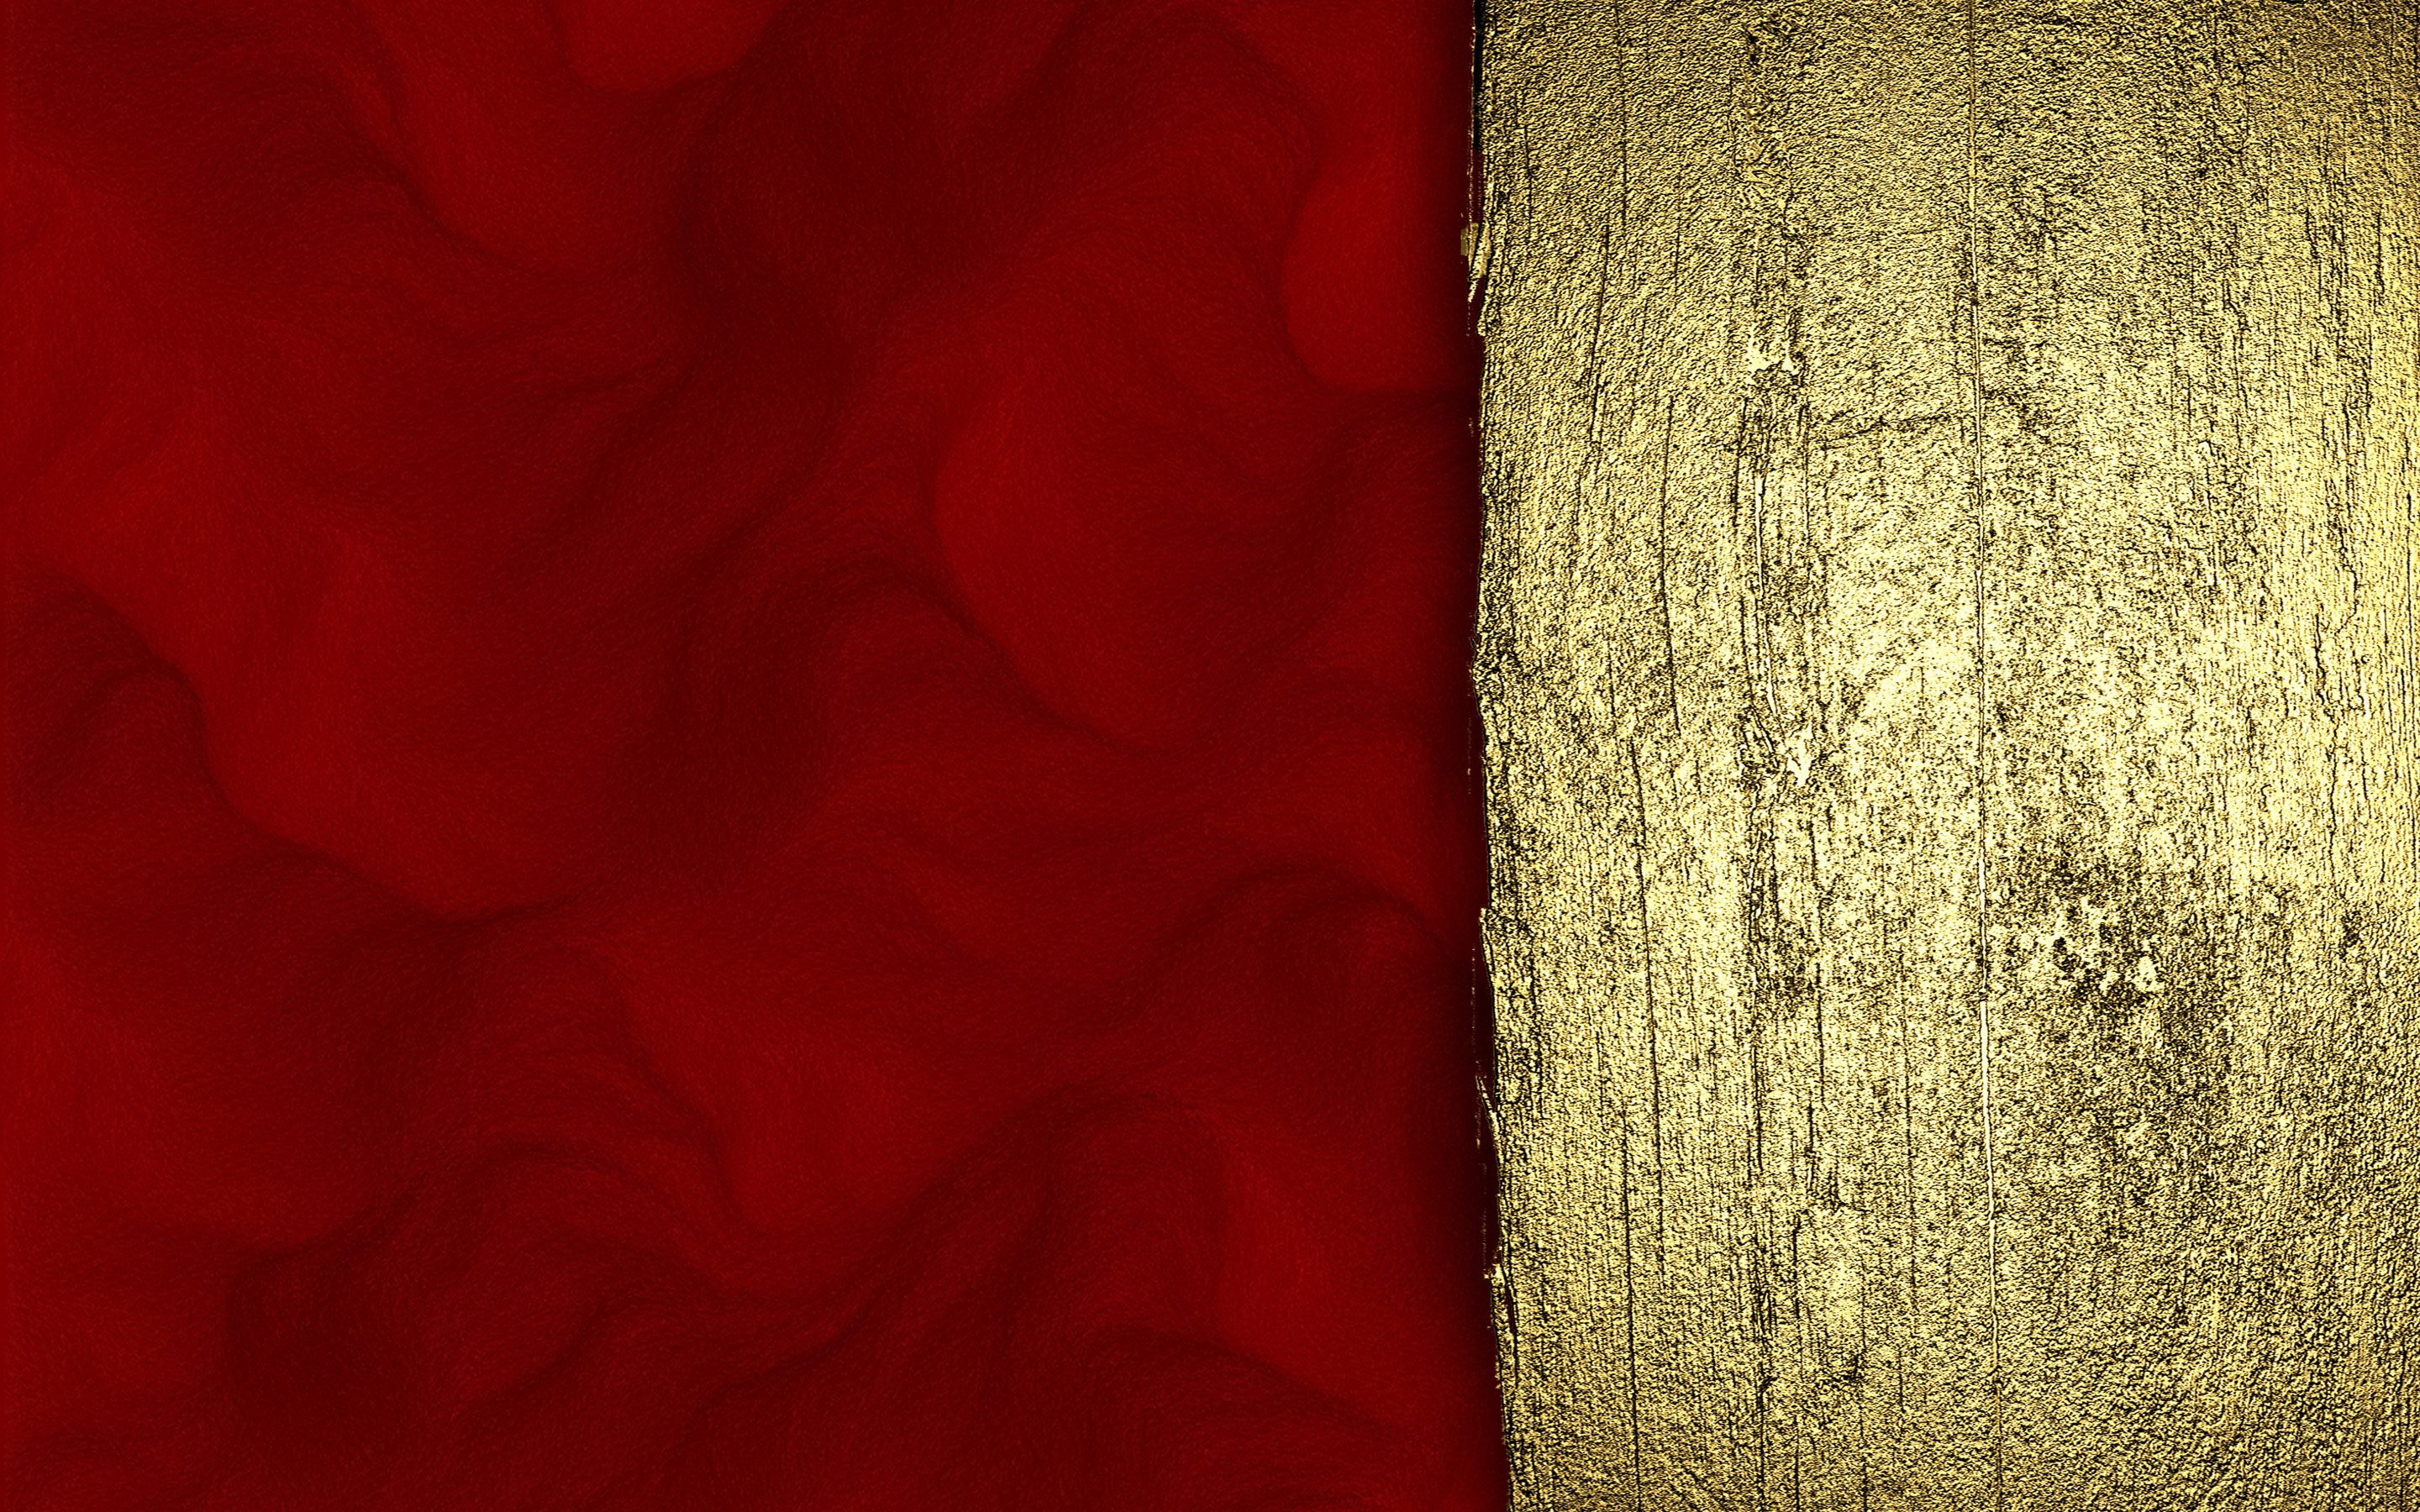 red and gold background images hd red and gold b 2880x1800